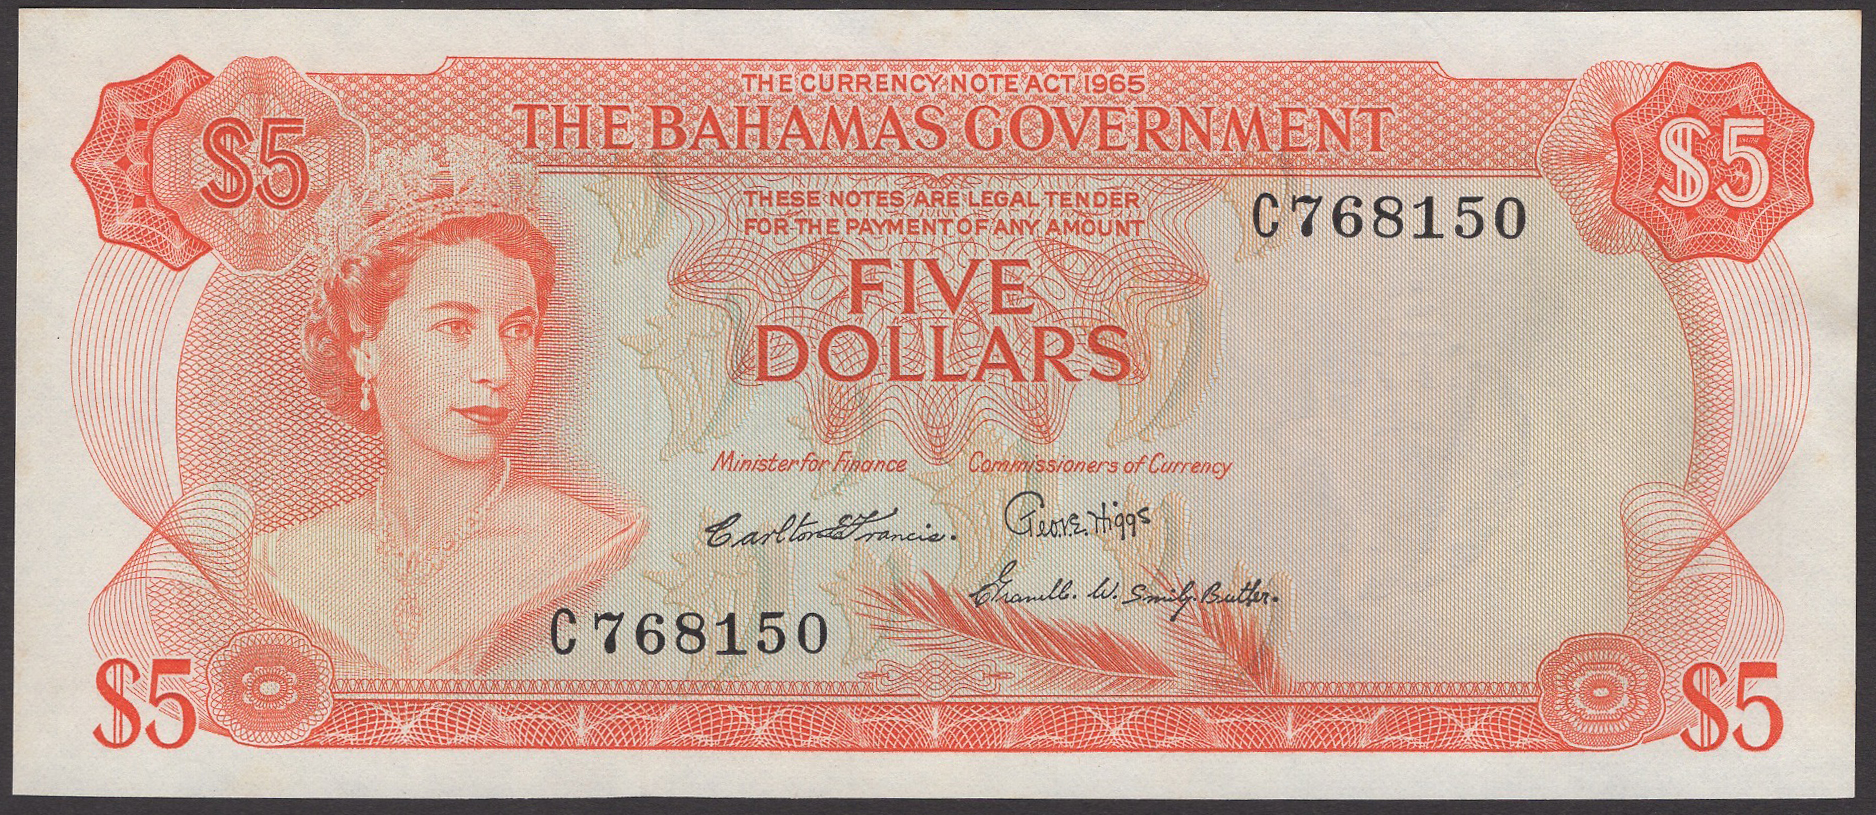 Bahamas Government, $5, 1965, serial number C768150, Francis, Higgs and Smiley-Butler...